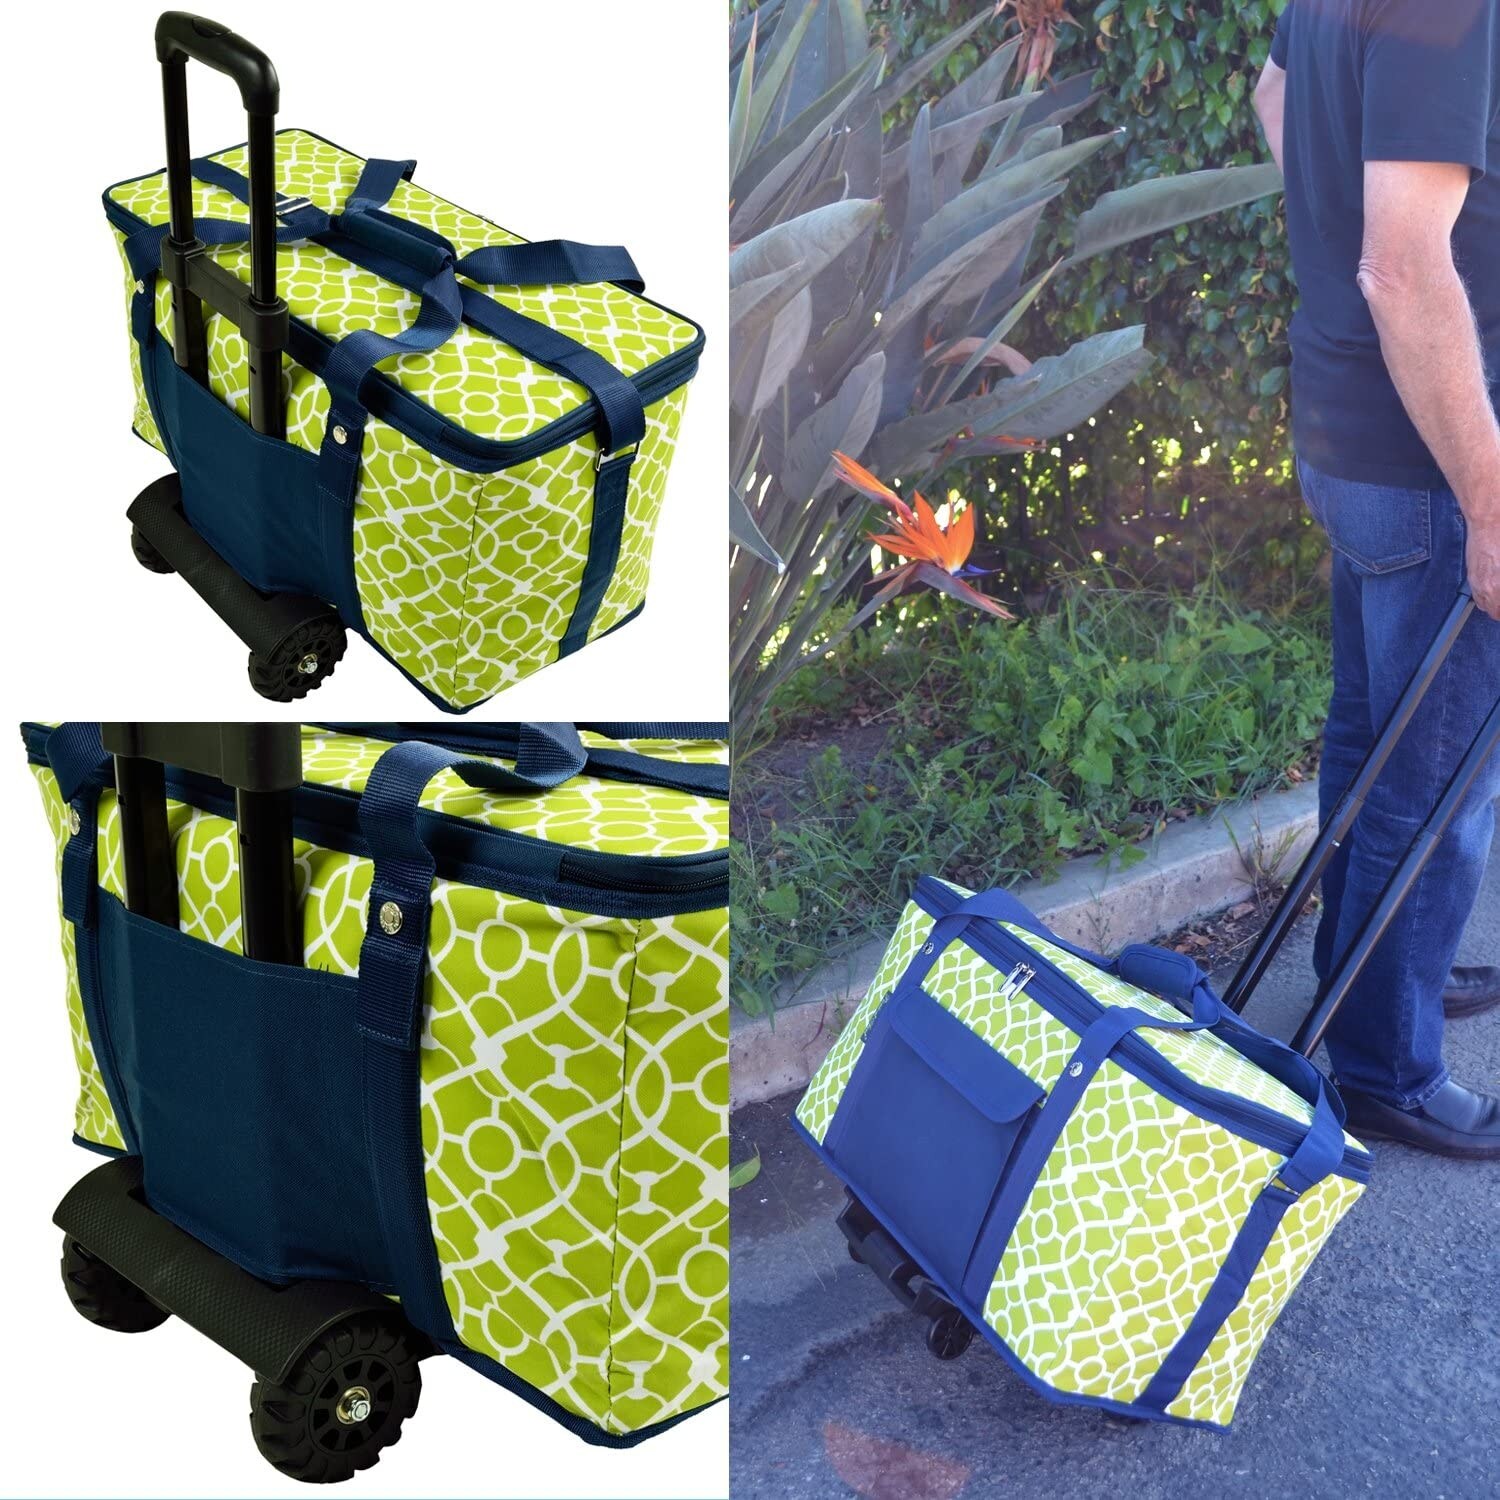 Picnic at Ascot Insulated Casserole Carrier to keep Food Hot or Cold -  Trellis Green